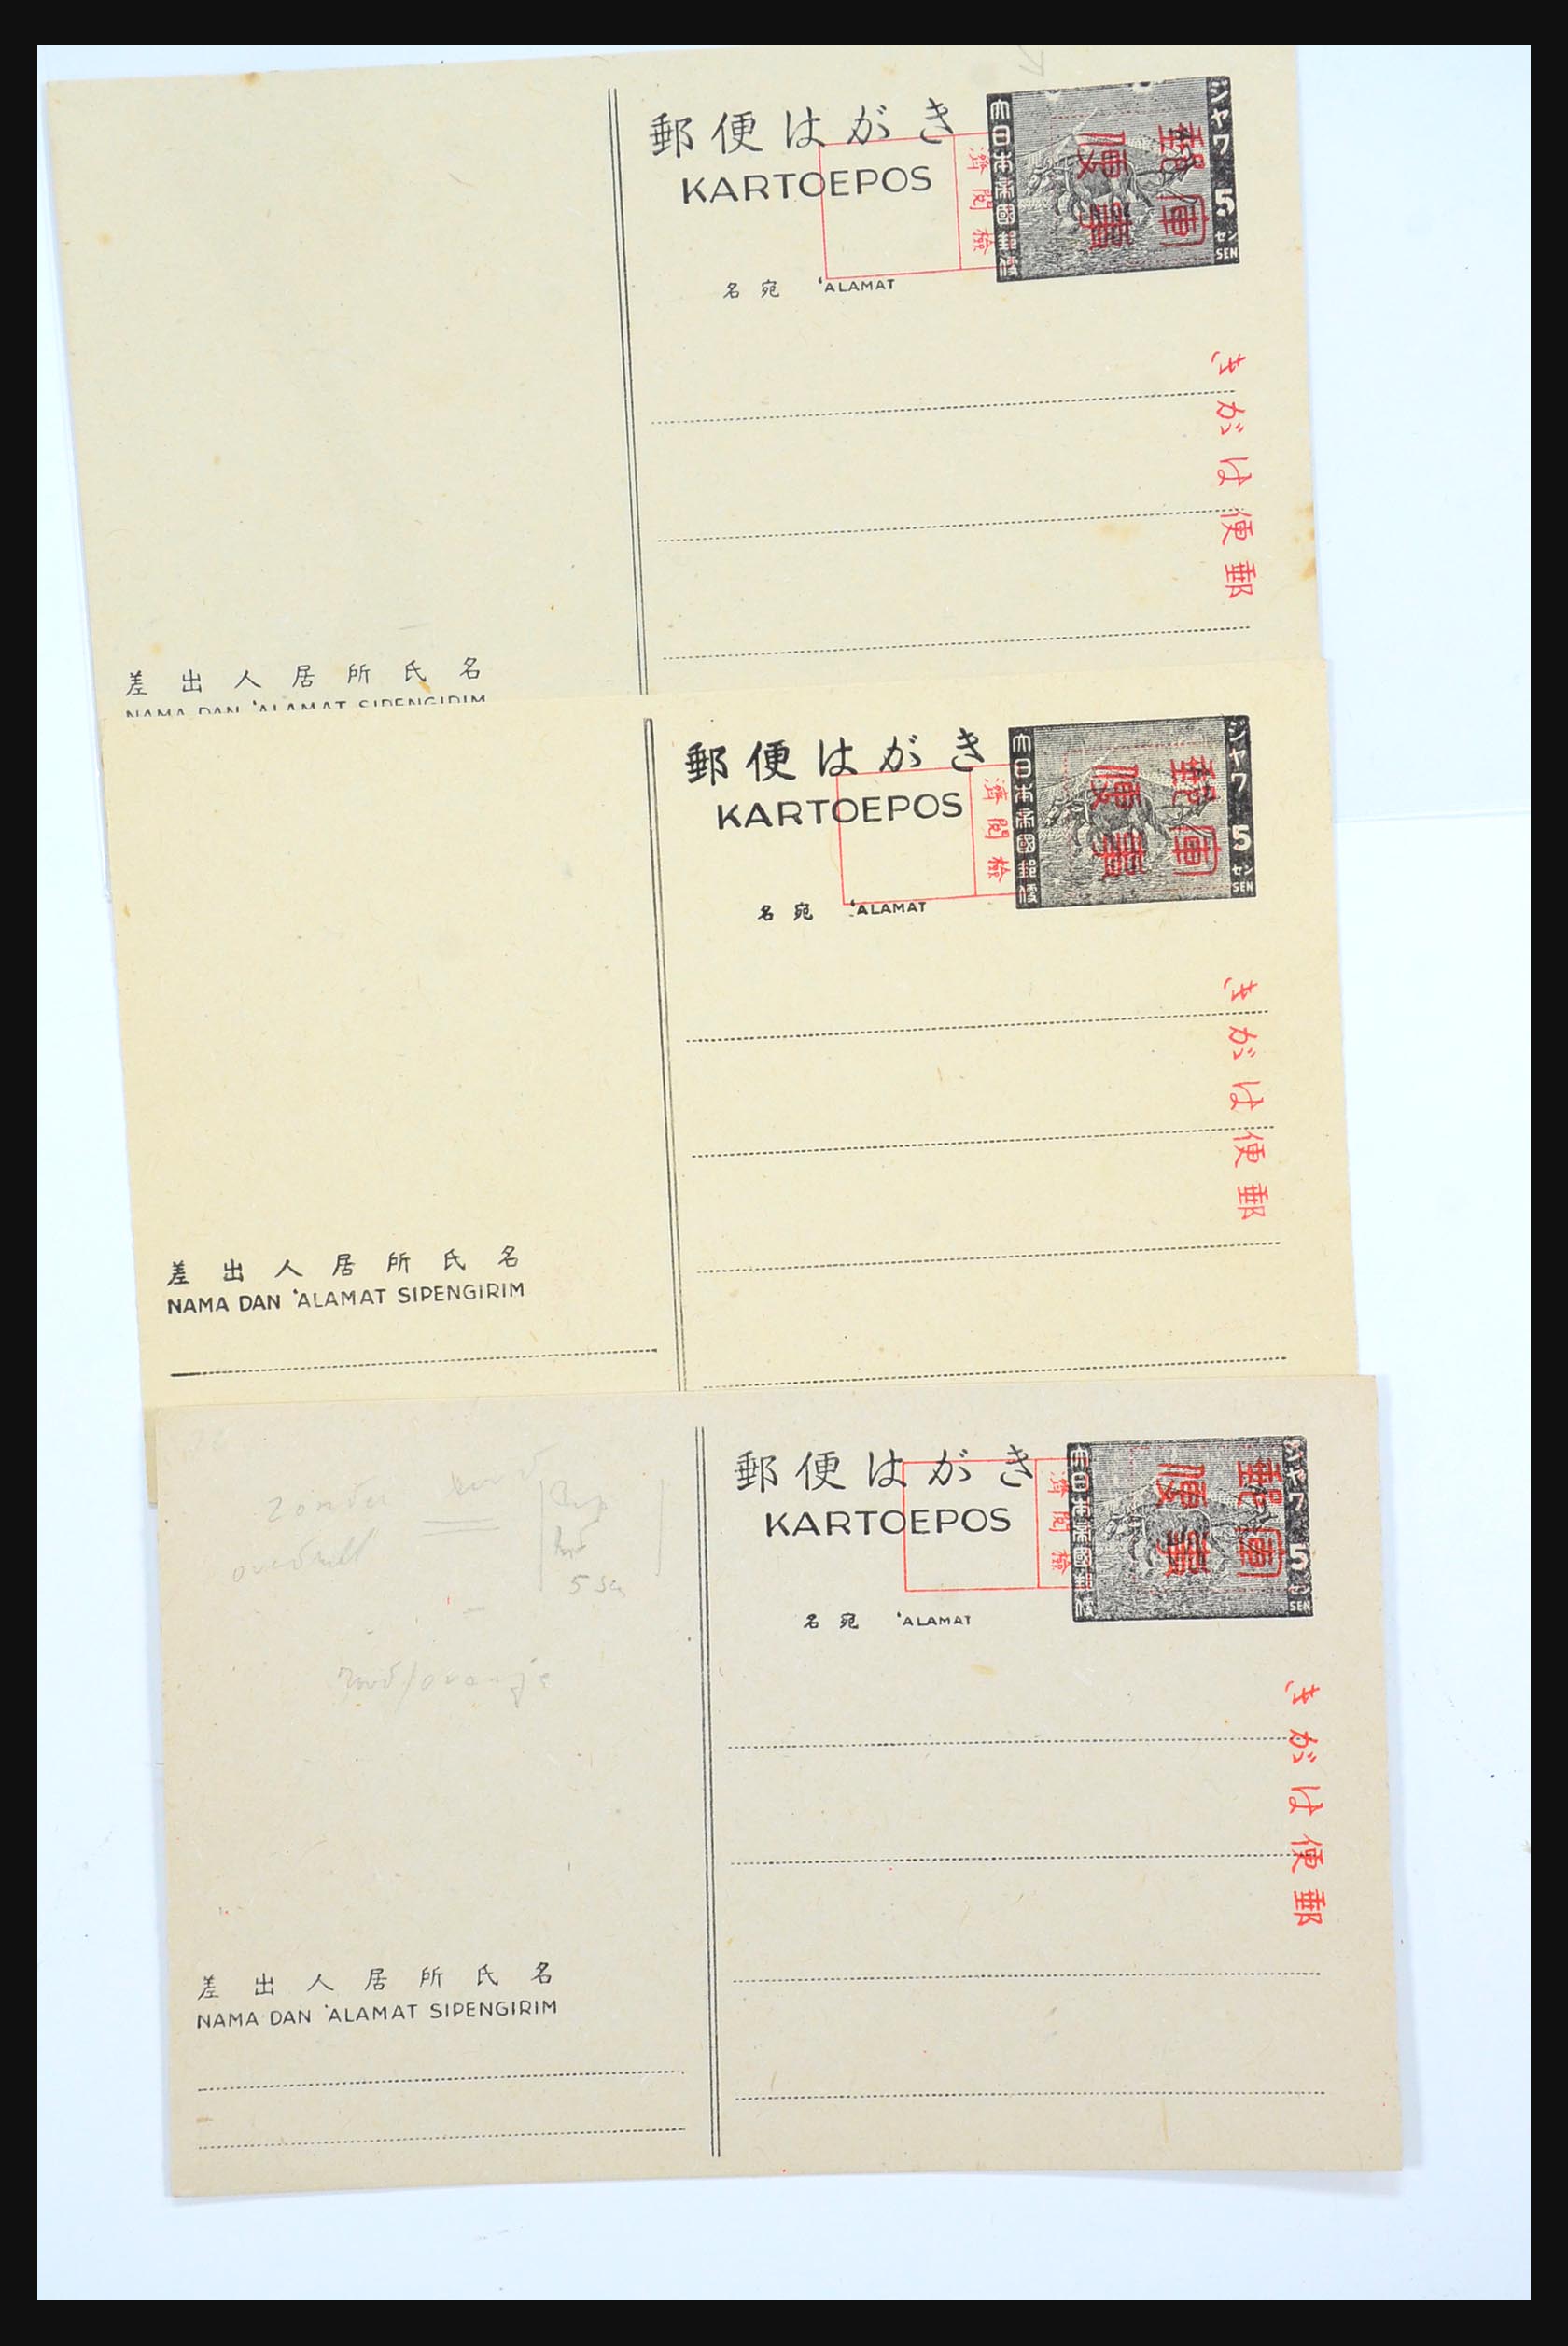 31362 072 - 31362 Netherlands Indies Japanese occupation covers 1942-1945.